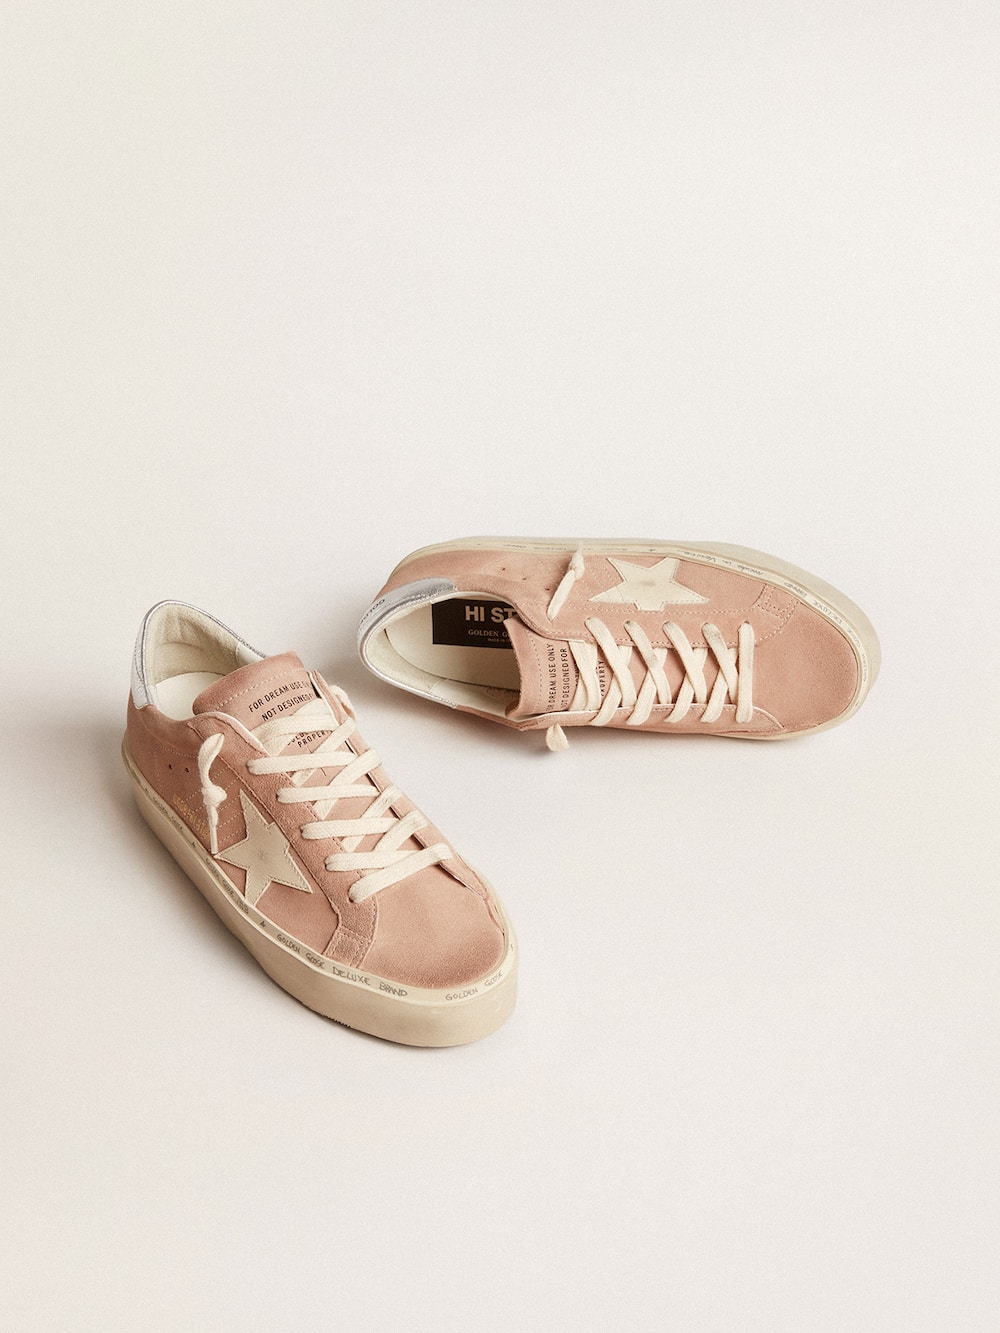 Golden Goose - Hi Star in pink suede with cream star and silver leather heel tab in 